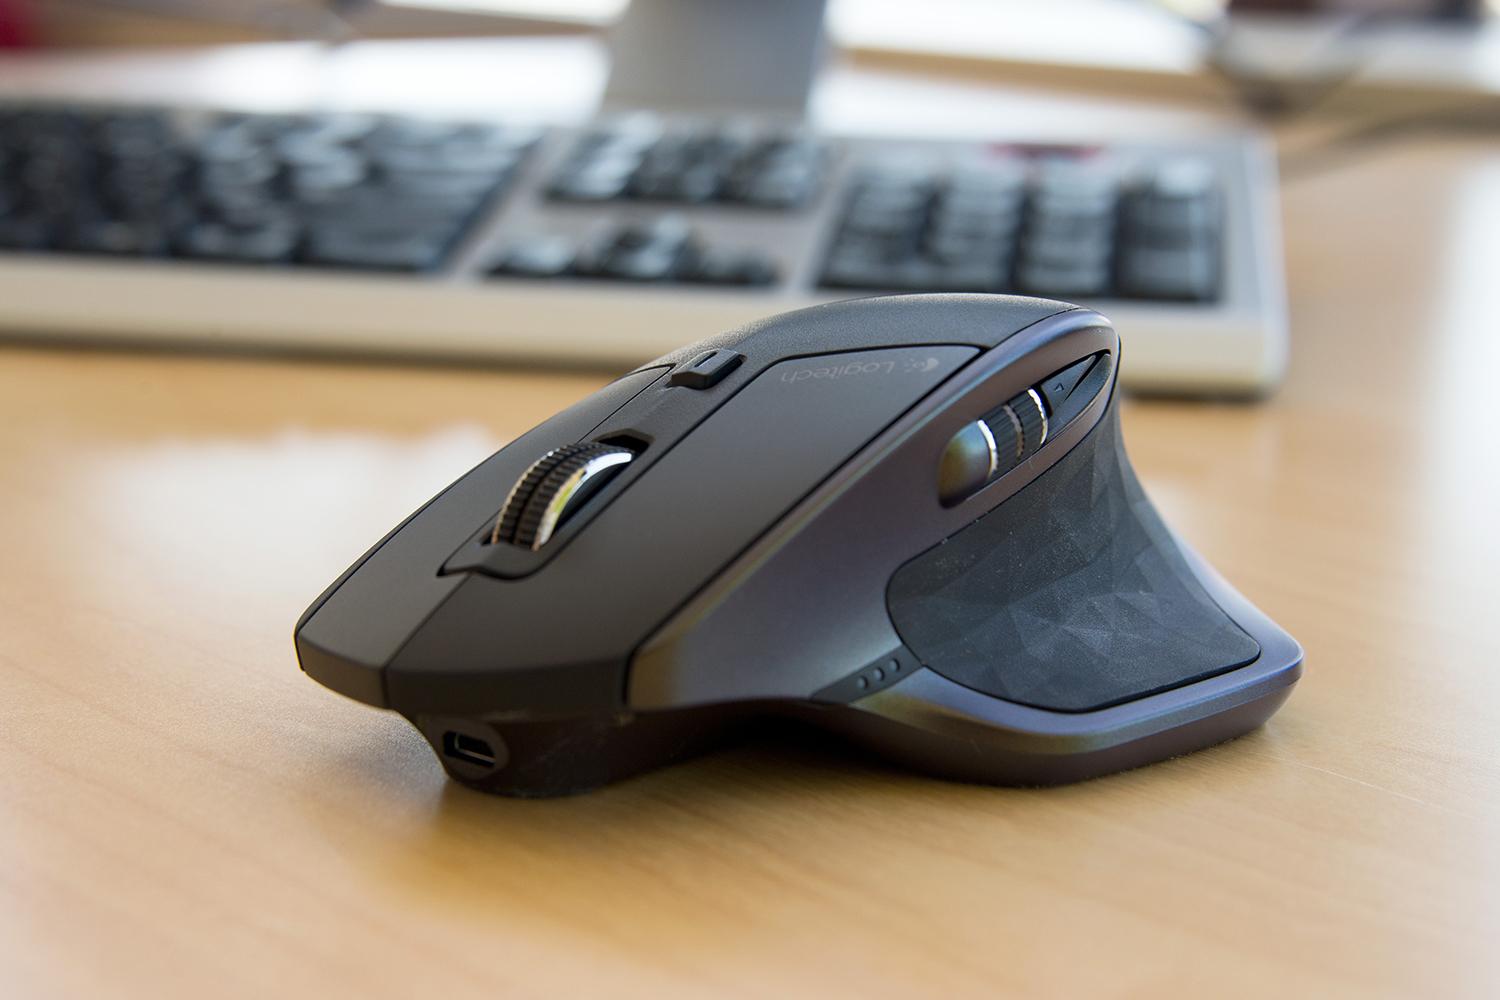 Logitech MX Master 2S (7 stores) see best prices now »